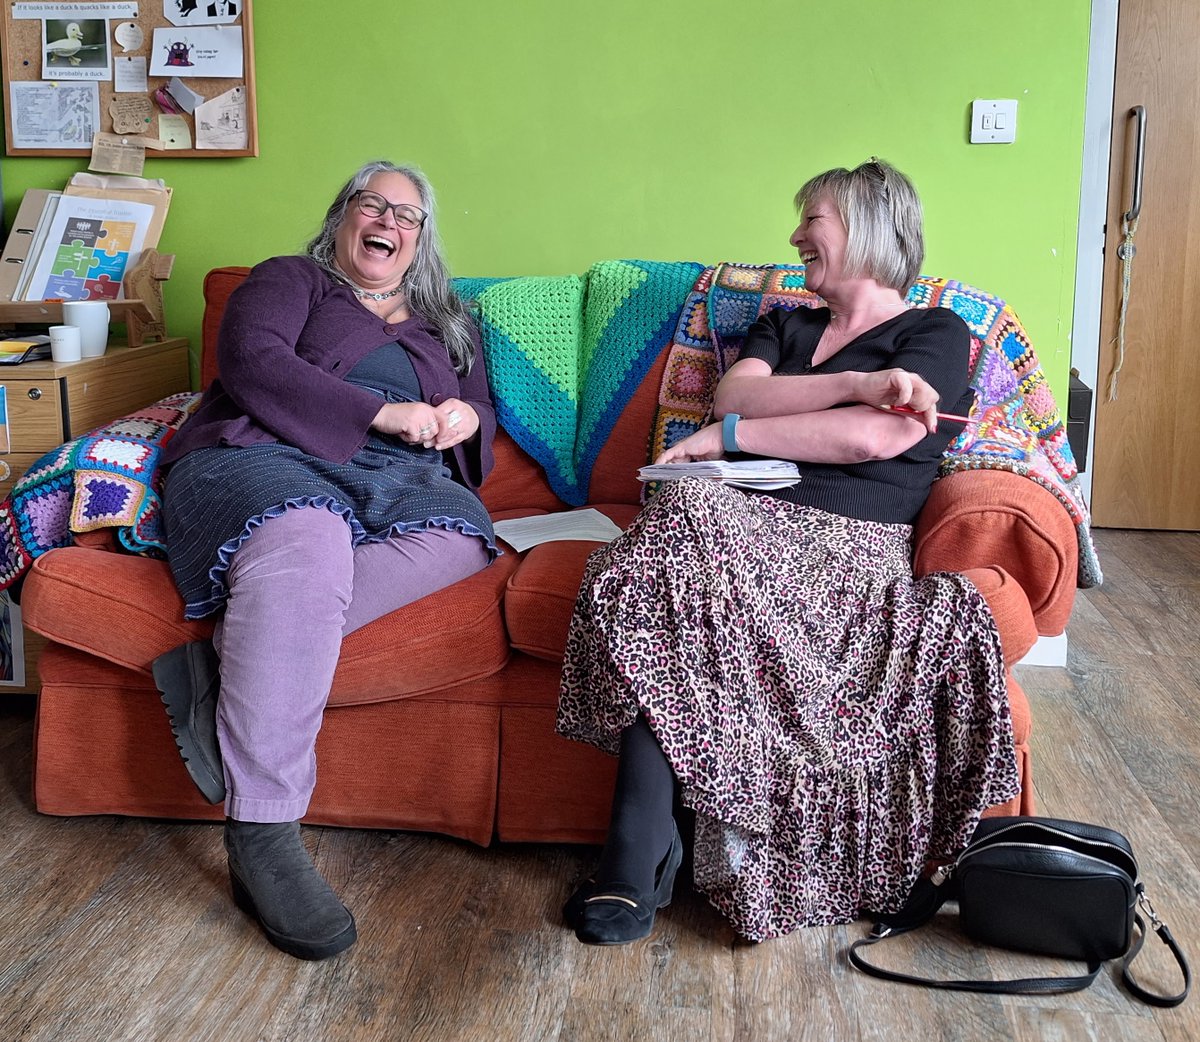 Mirth at @MannaHouseKendl as CEO Andrea and @Michele_lstr discuss the difference support from @LBFEW has made to the charity. A #smallbutvital charity supporting homeless people in rural Cumbria.